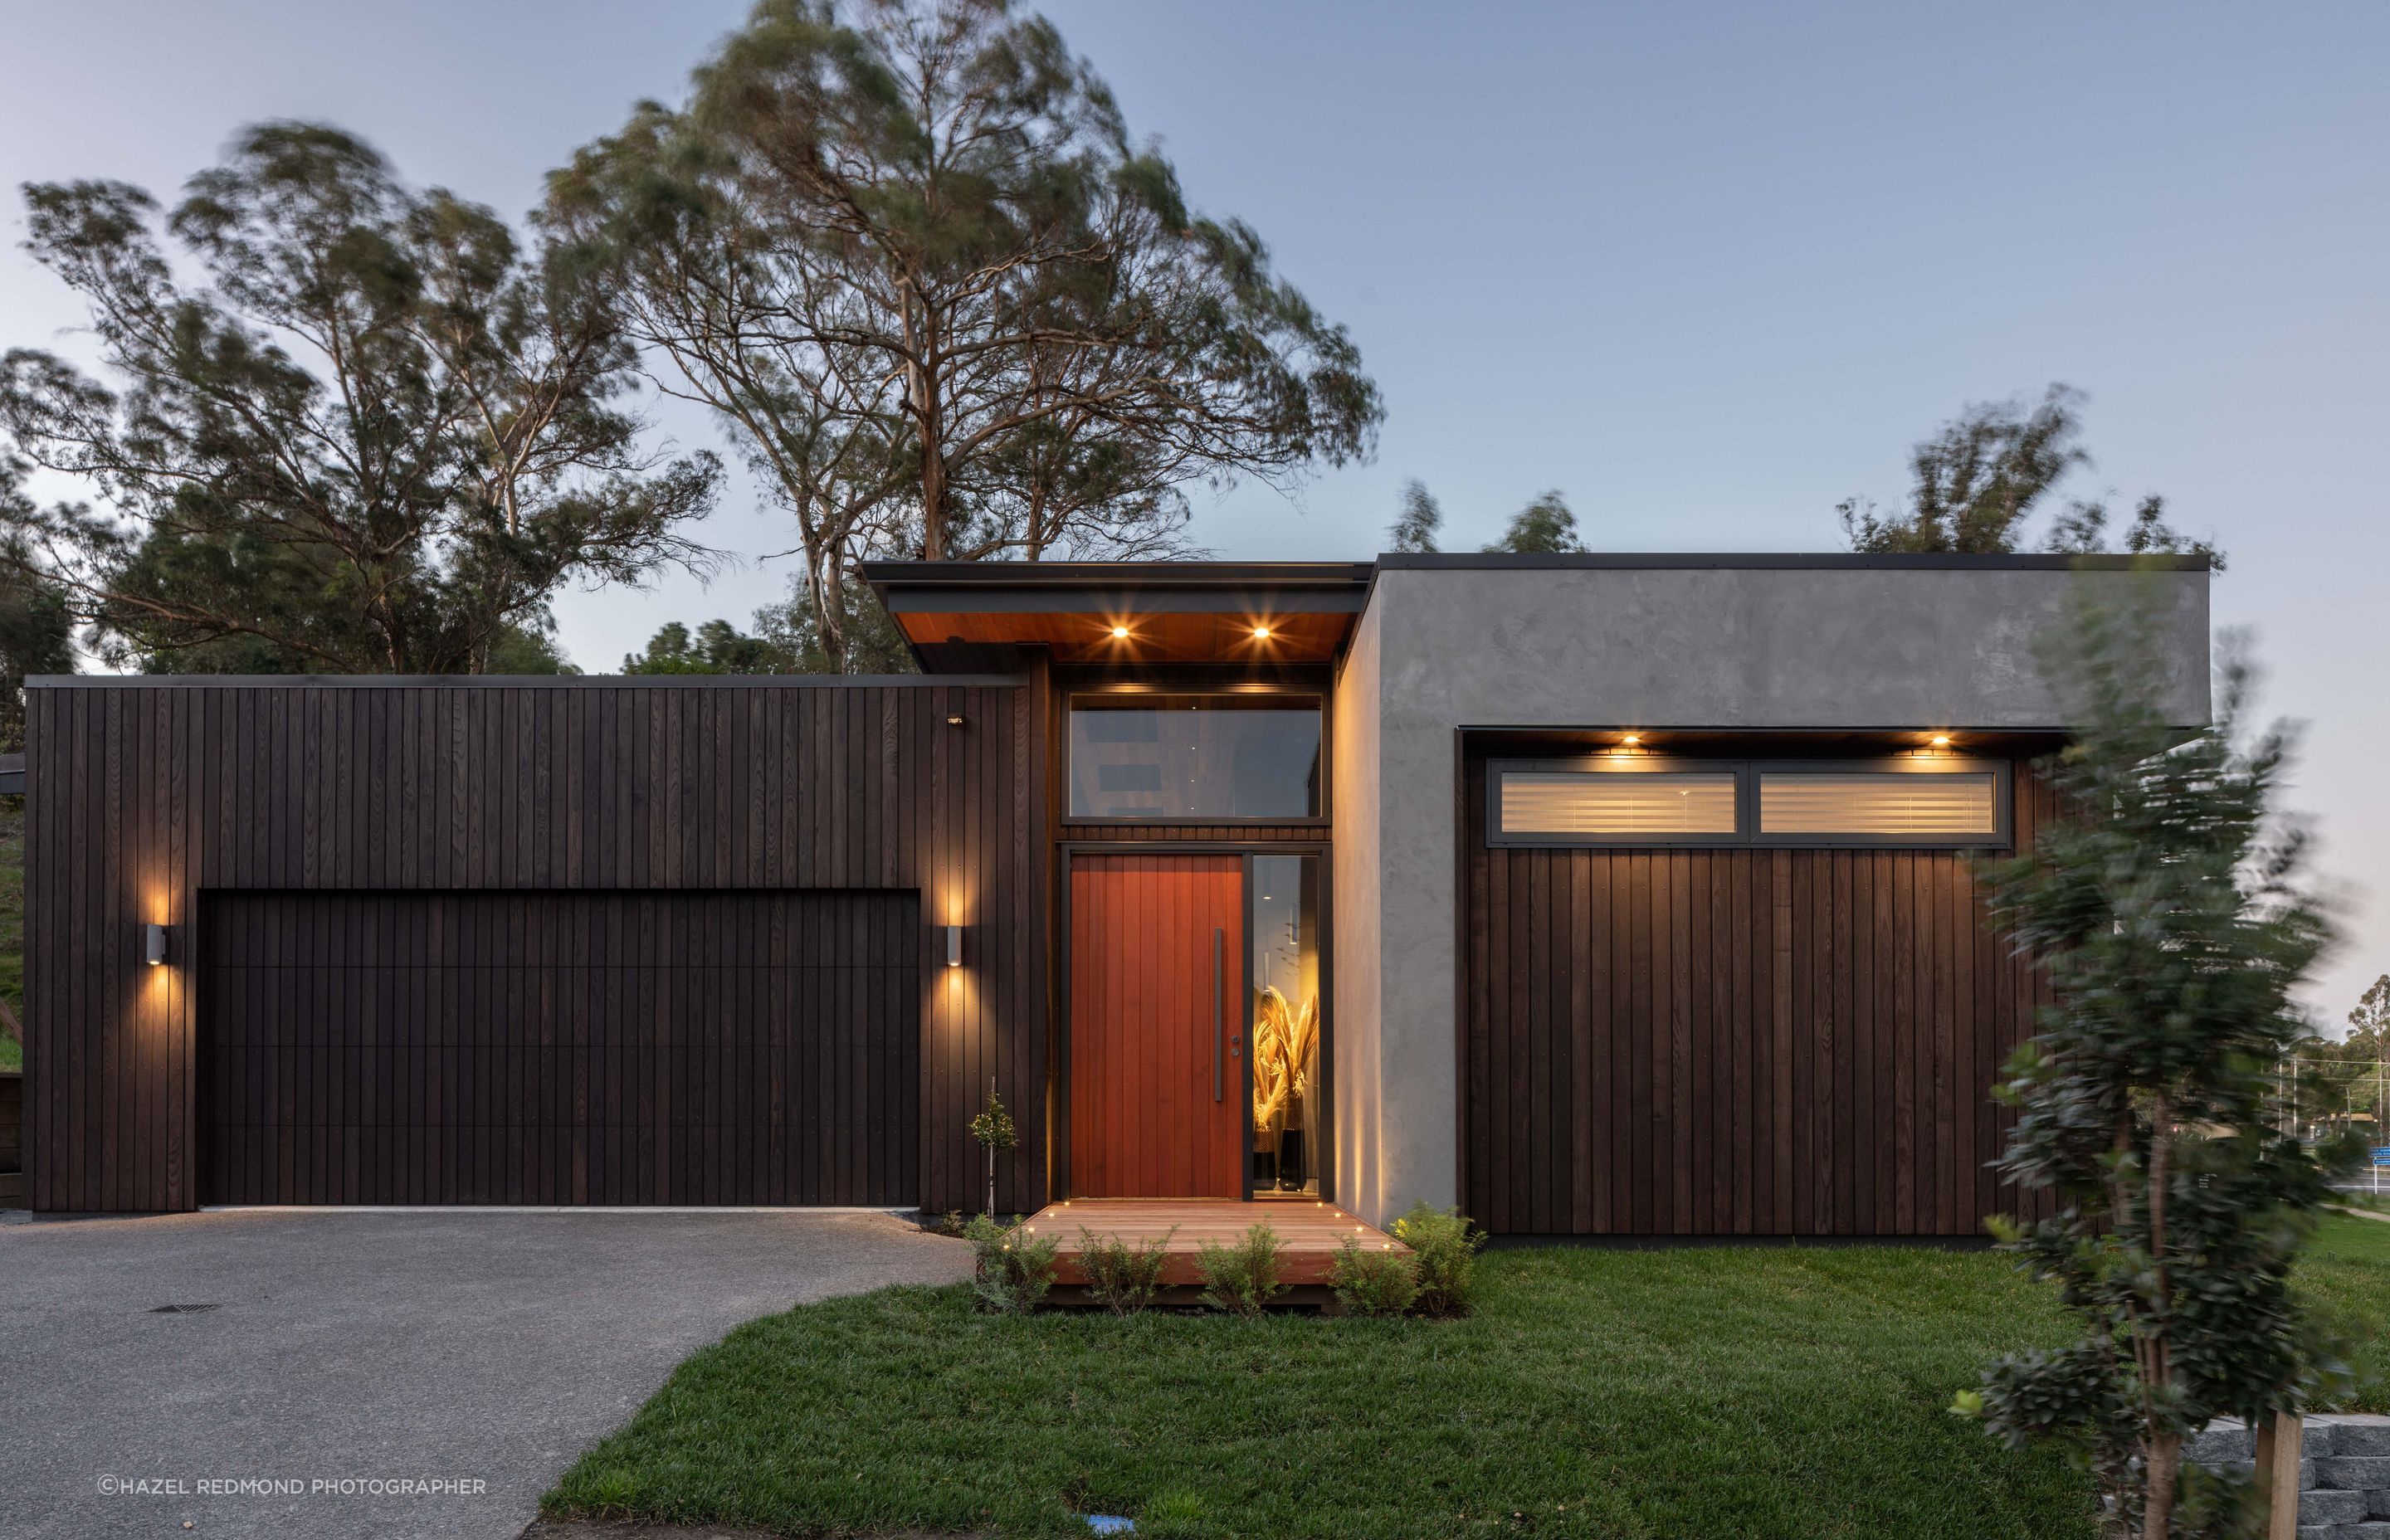 Built by Design Builders Hawke's Bay, this stunning architectural home used Thermory Ash cladding when cedar wasn't available, due to supply chain issues.